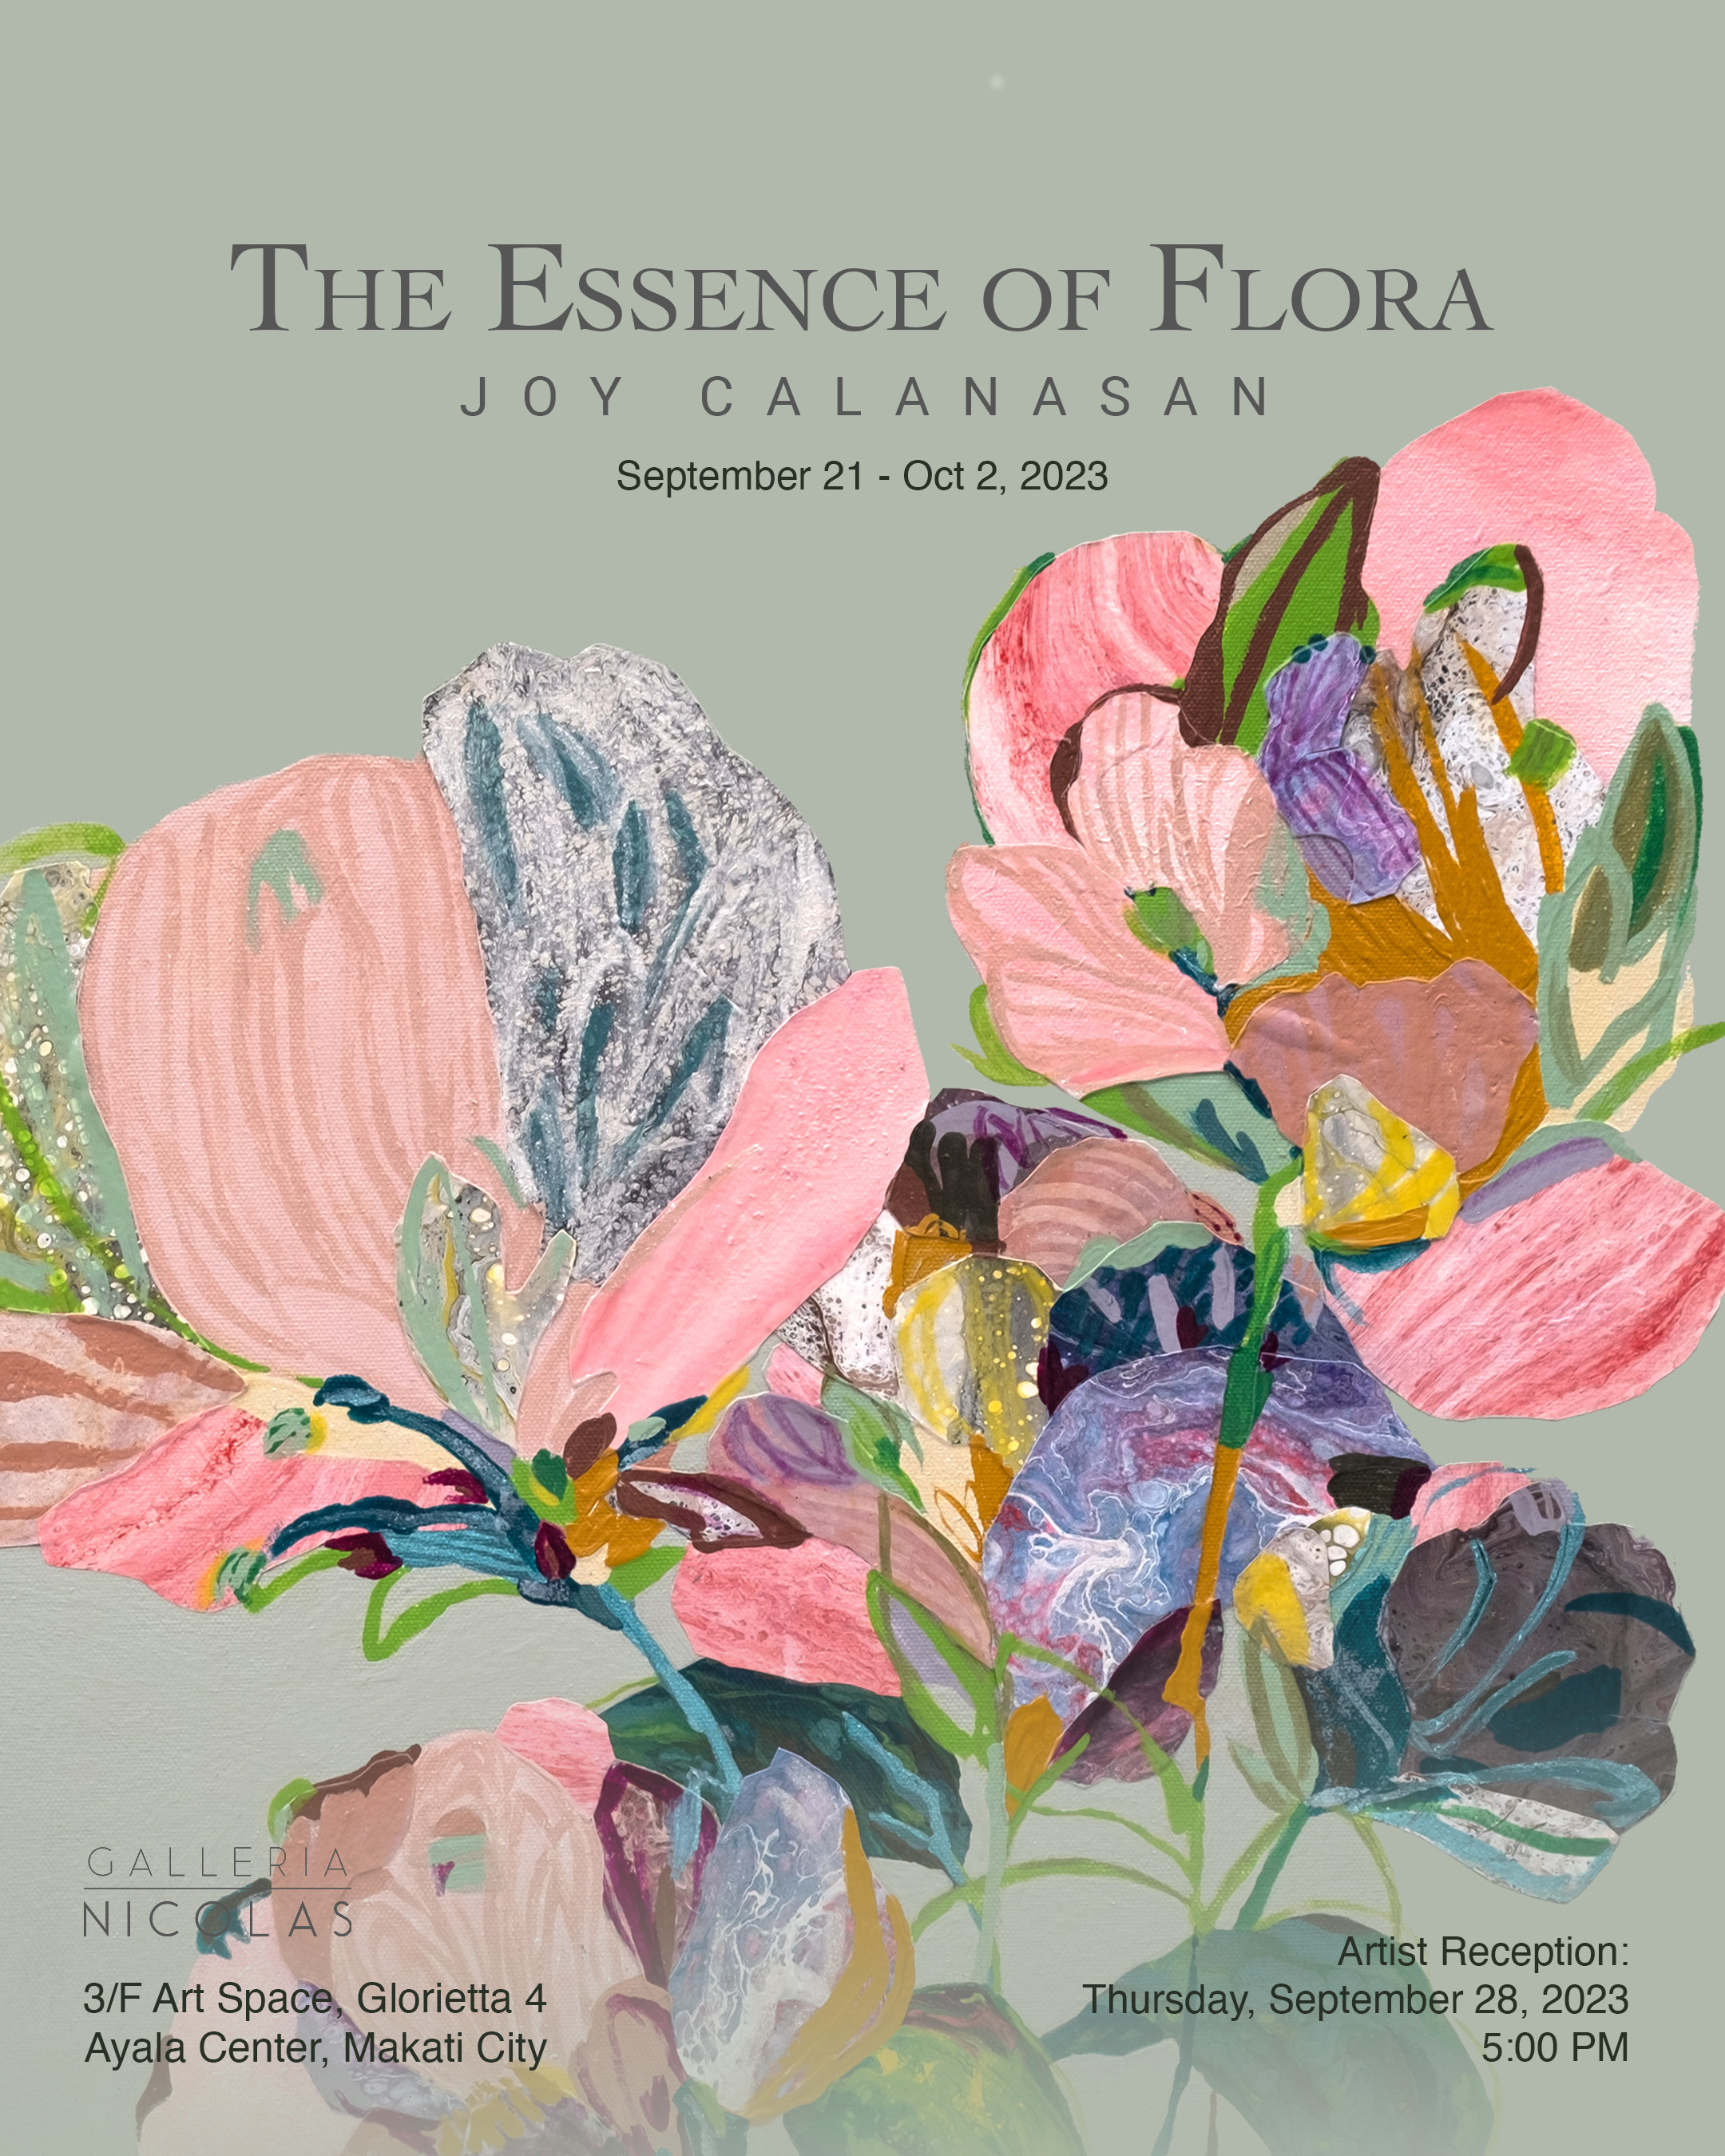 The Essence of Flora